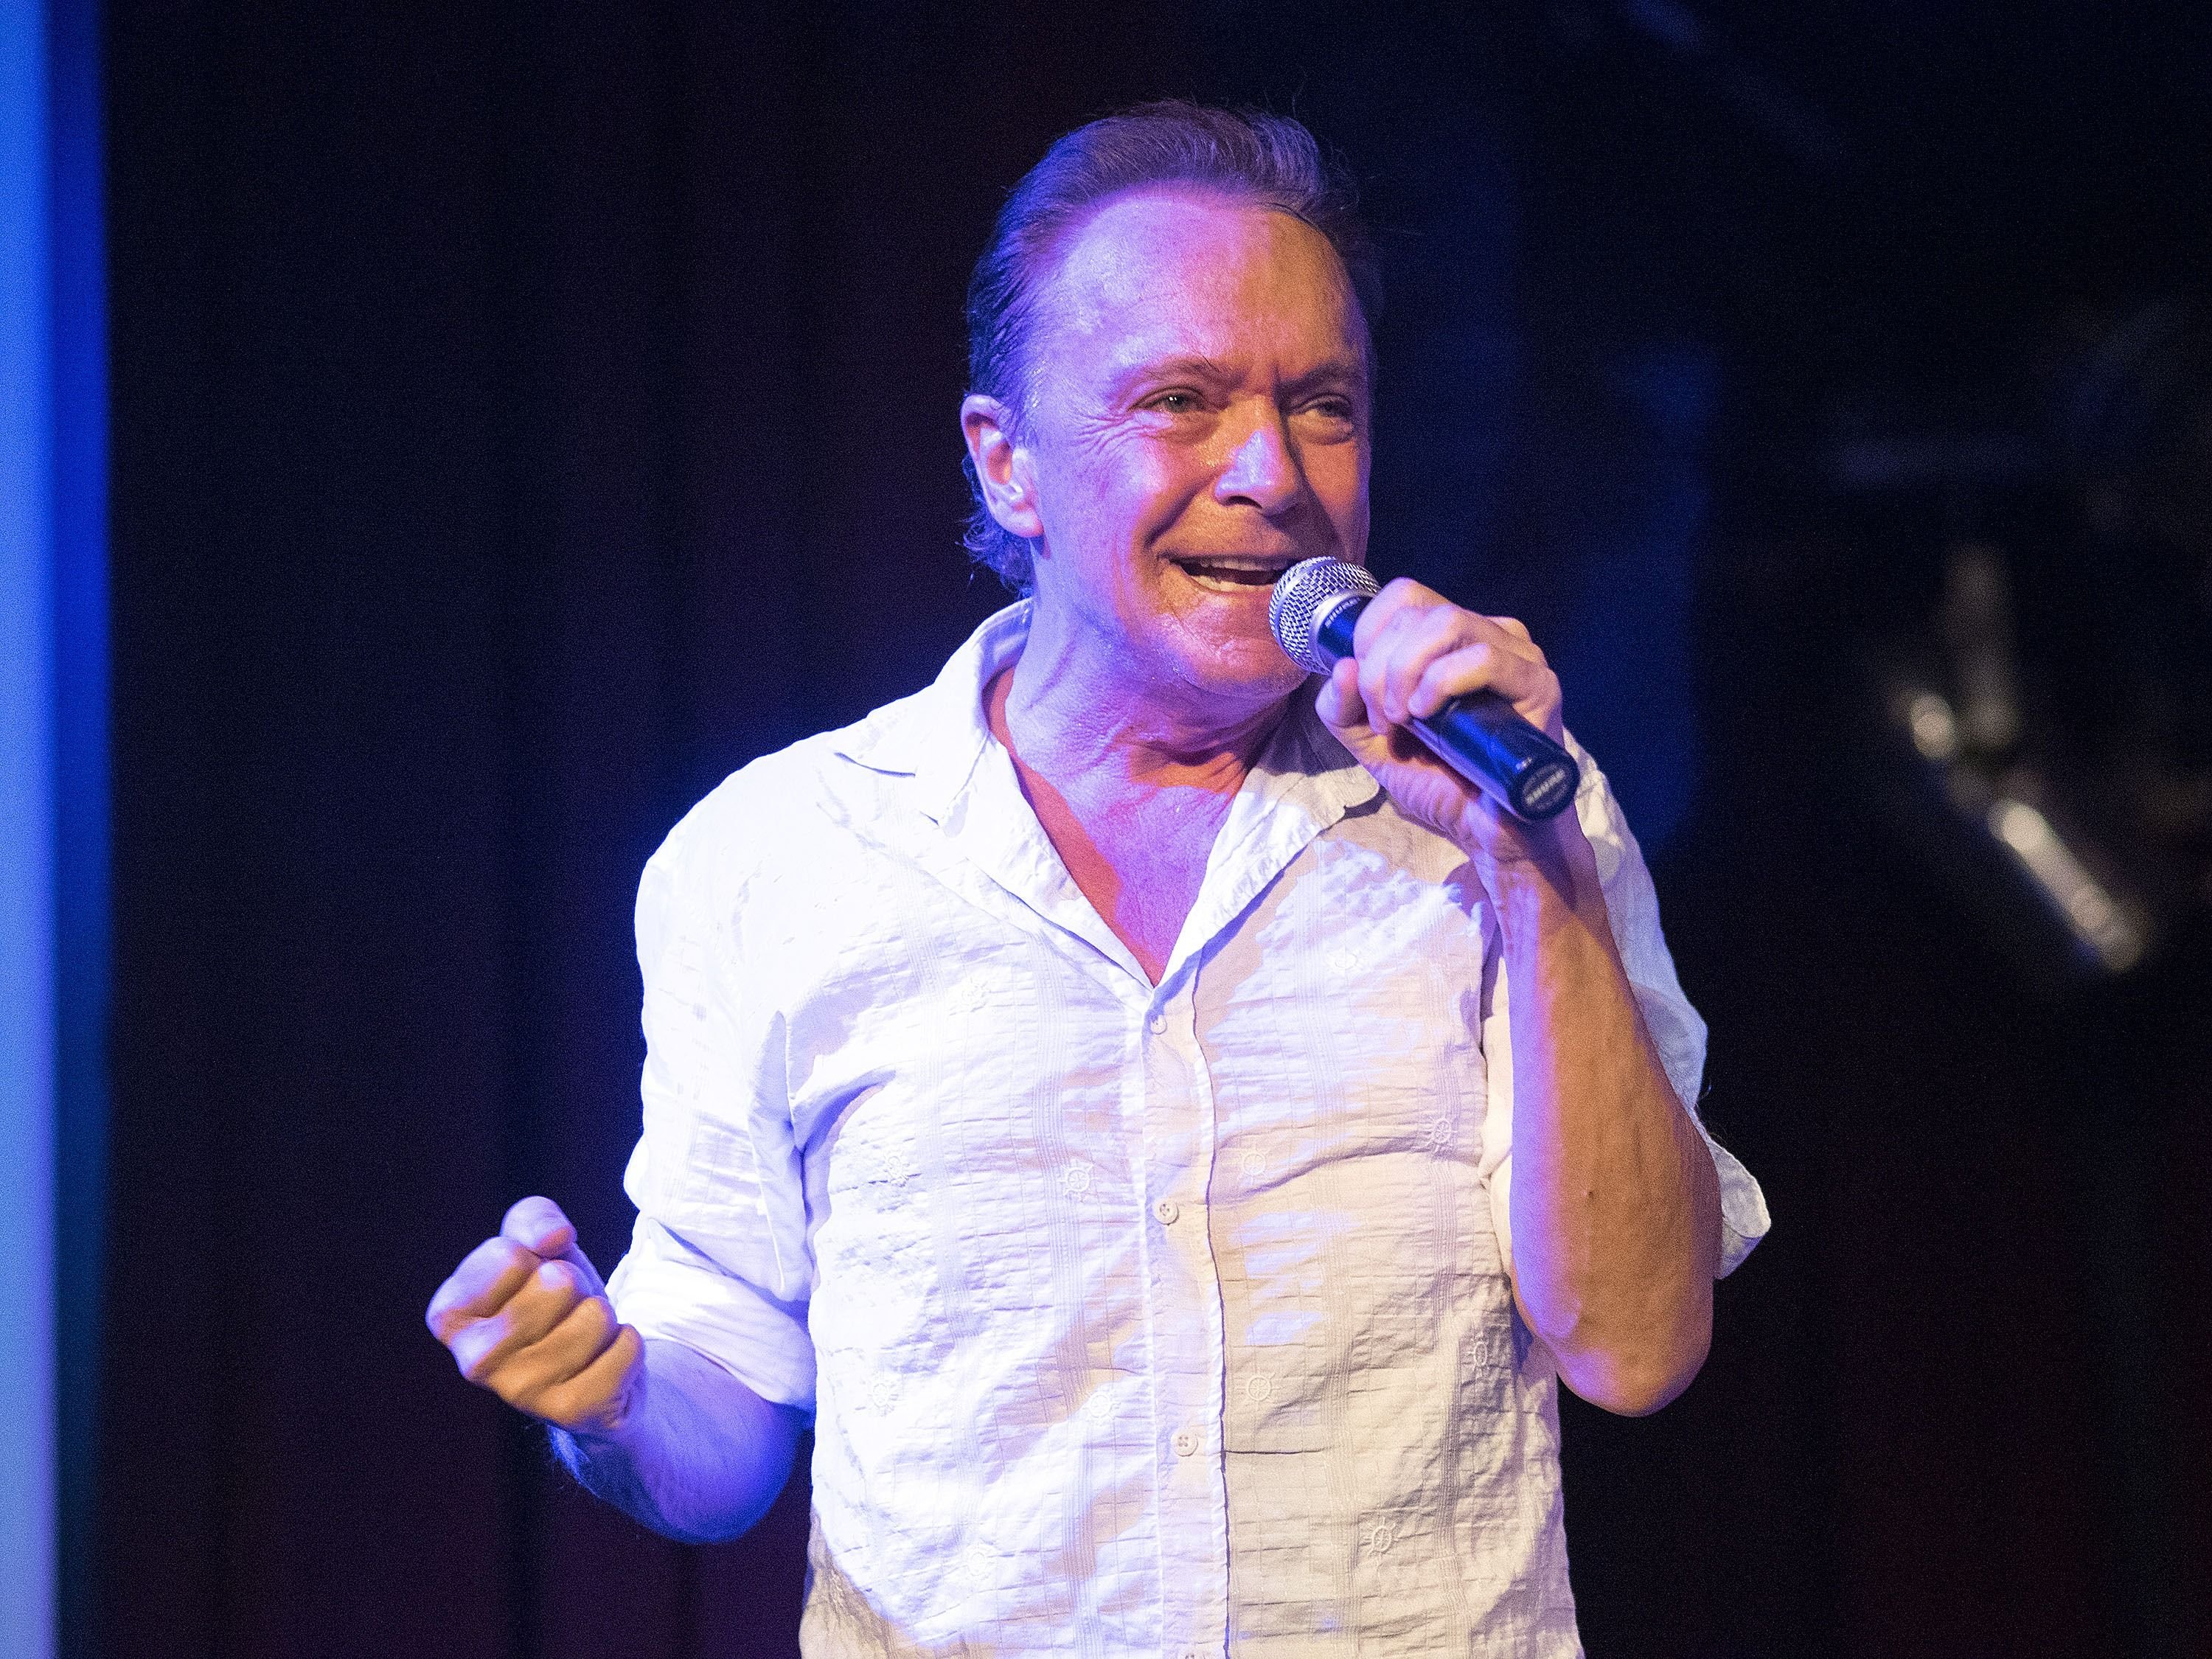 Musician David Cassidy performs at BB King on January 10, 2015. | Photo: Getty Images